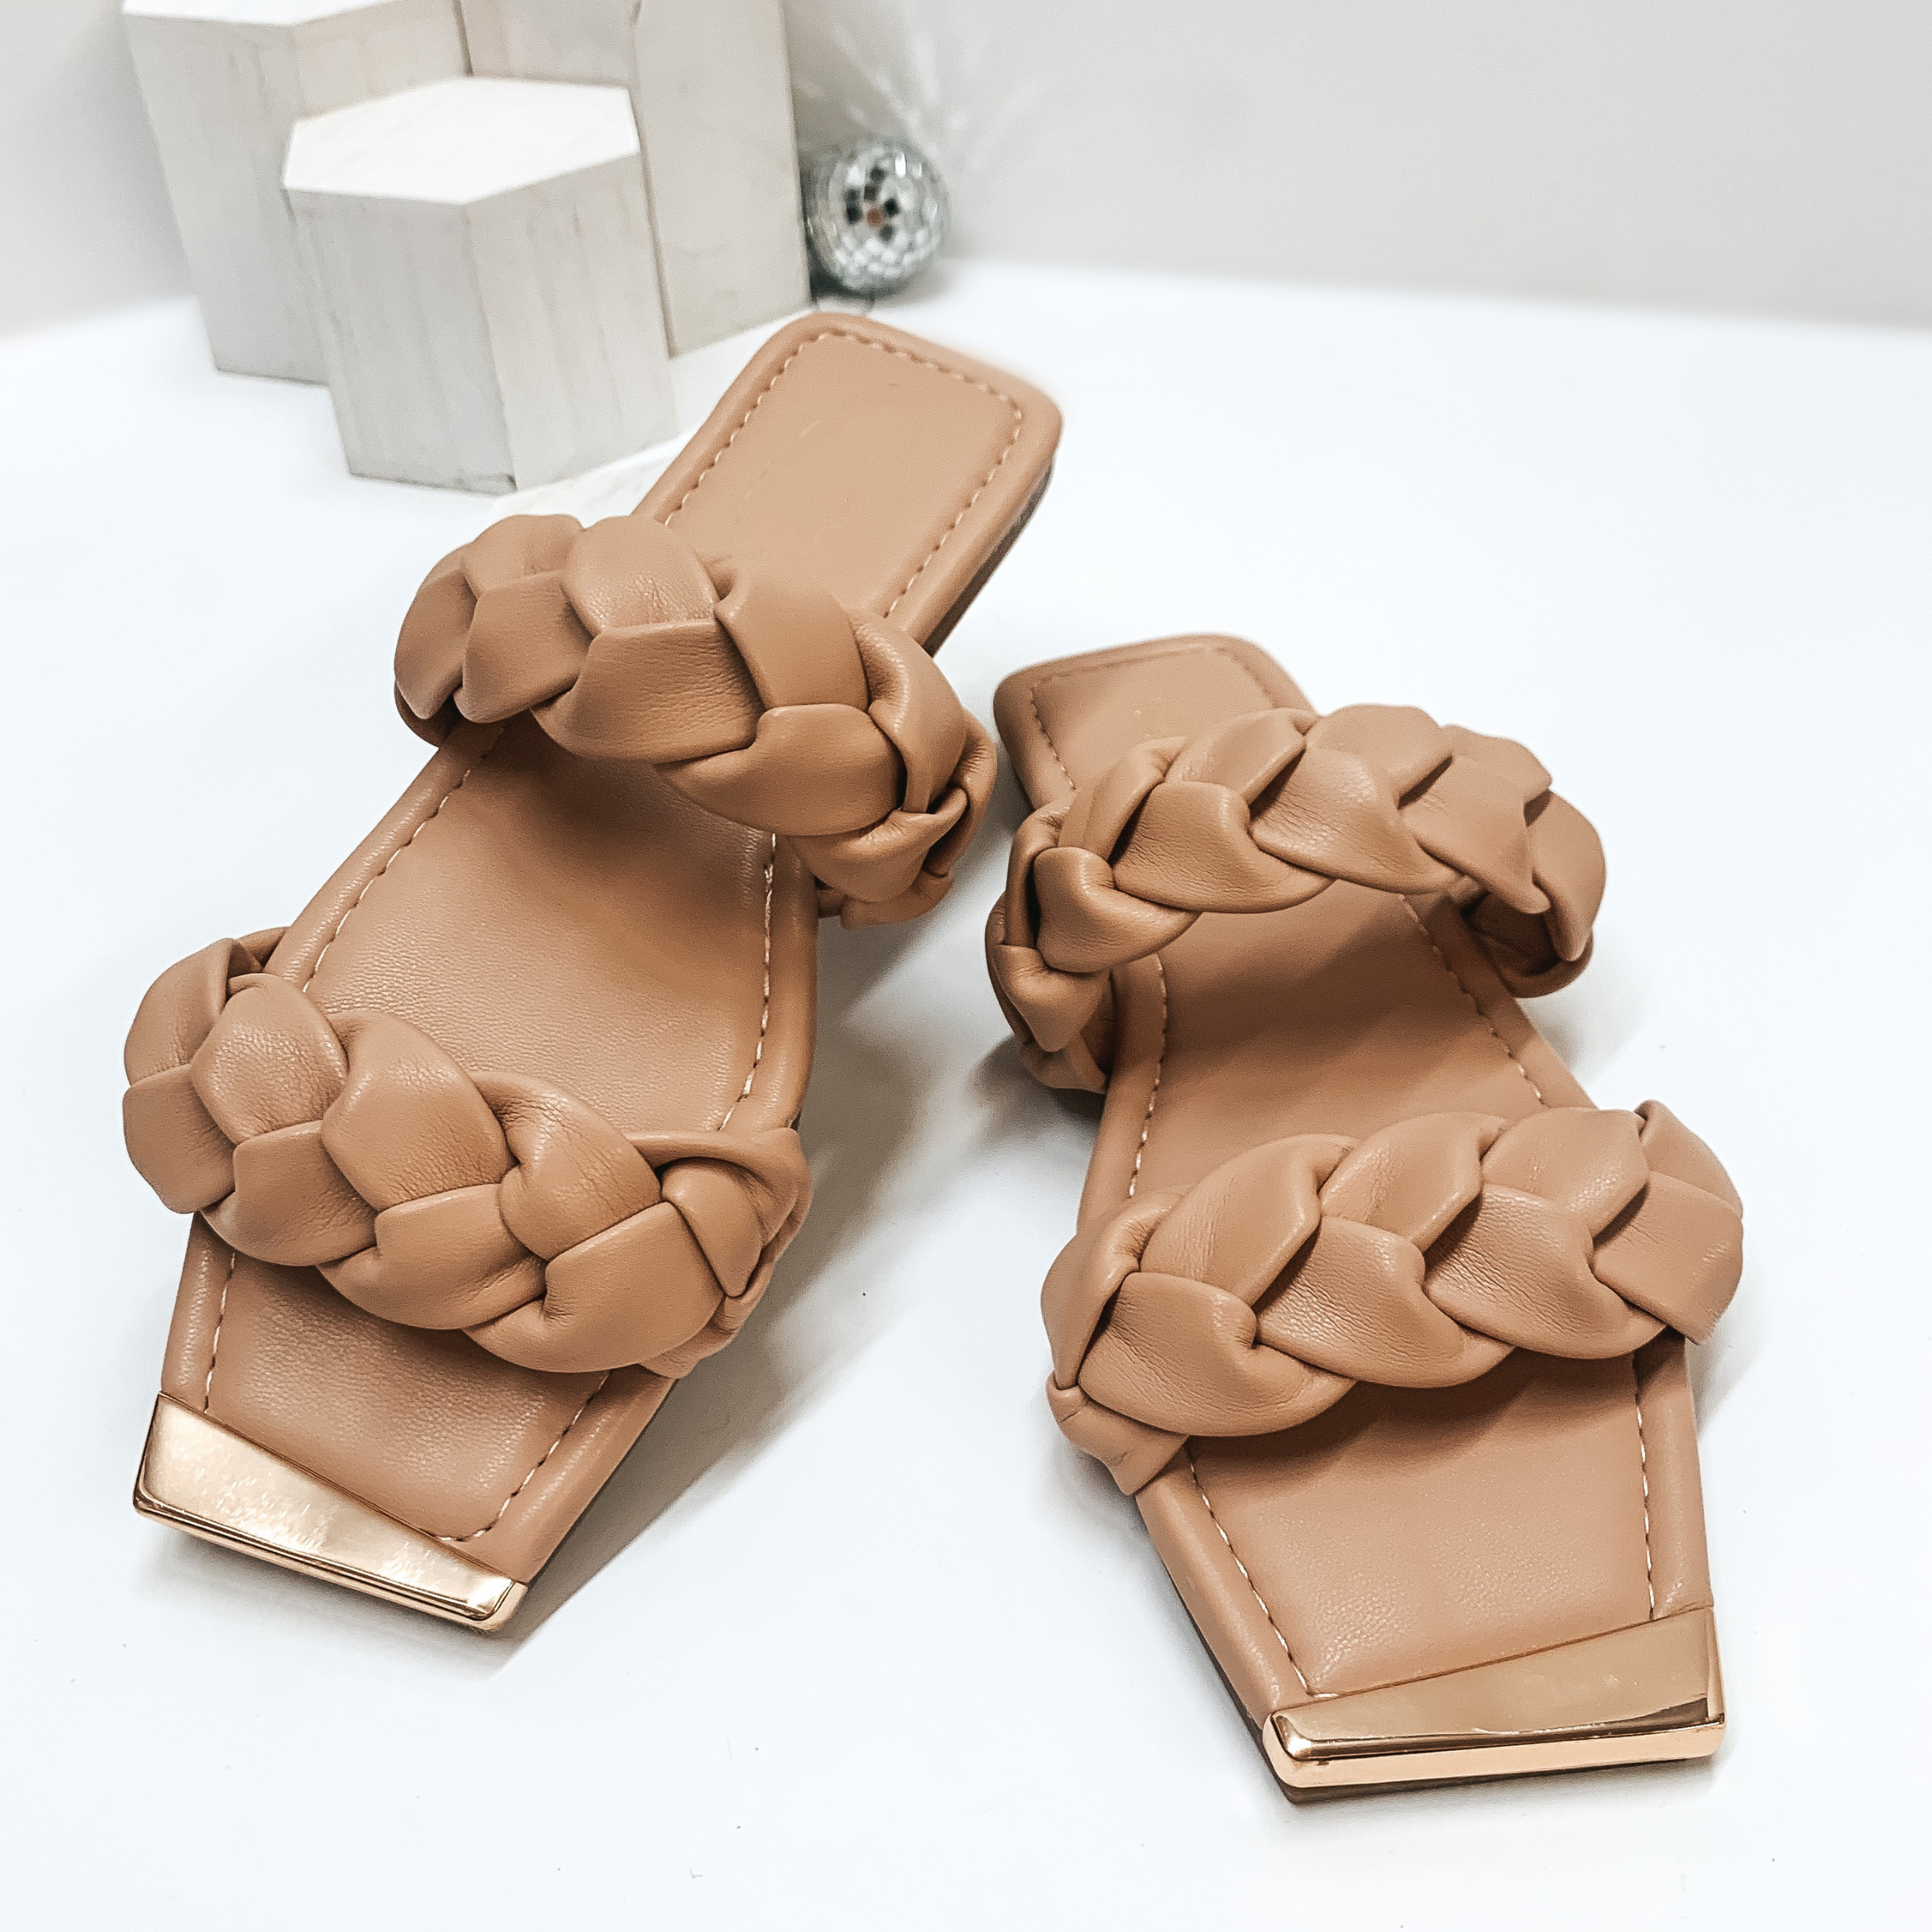 Soft Smiles Two Band Braided Slide On Sandals in Nude - Giddy Up Glamour Boutique